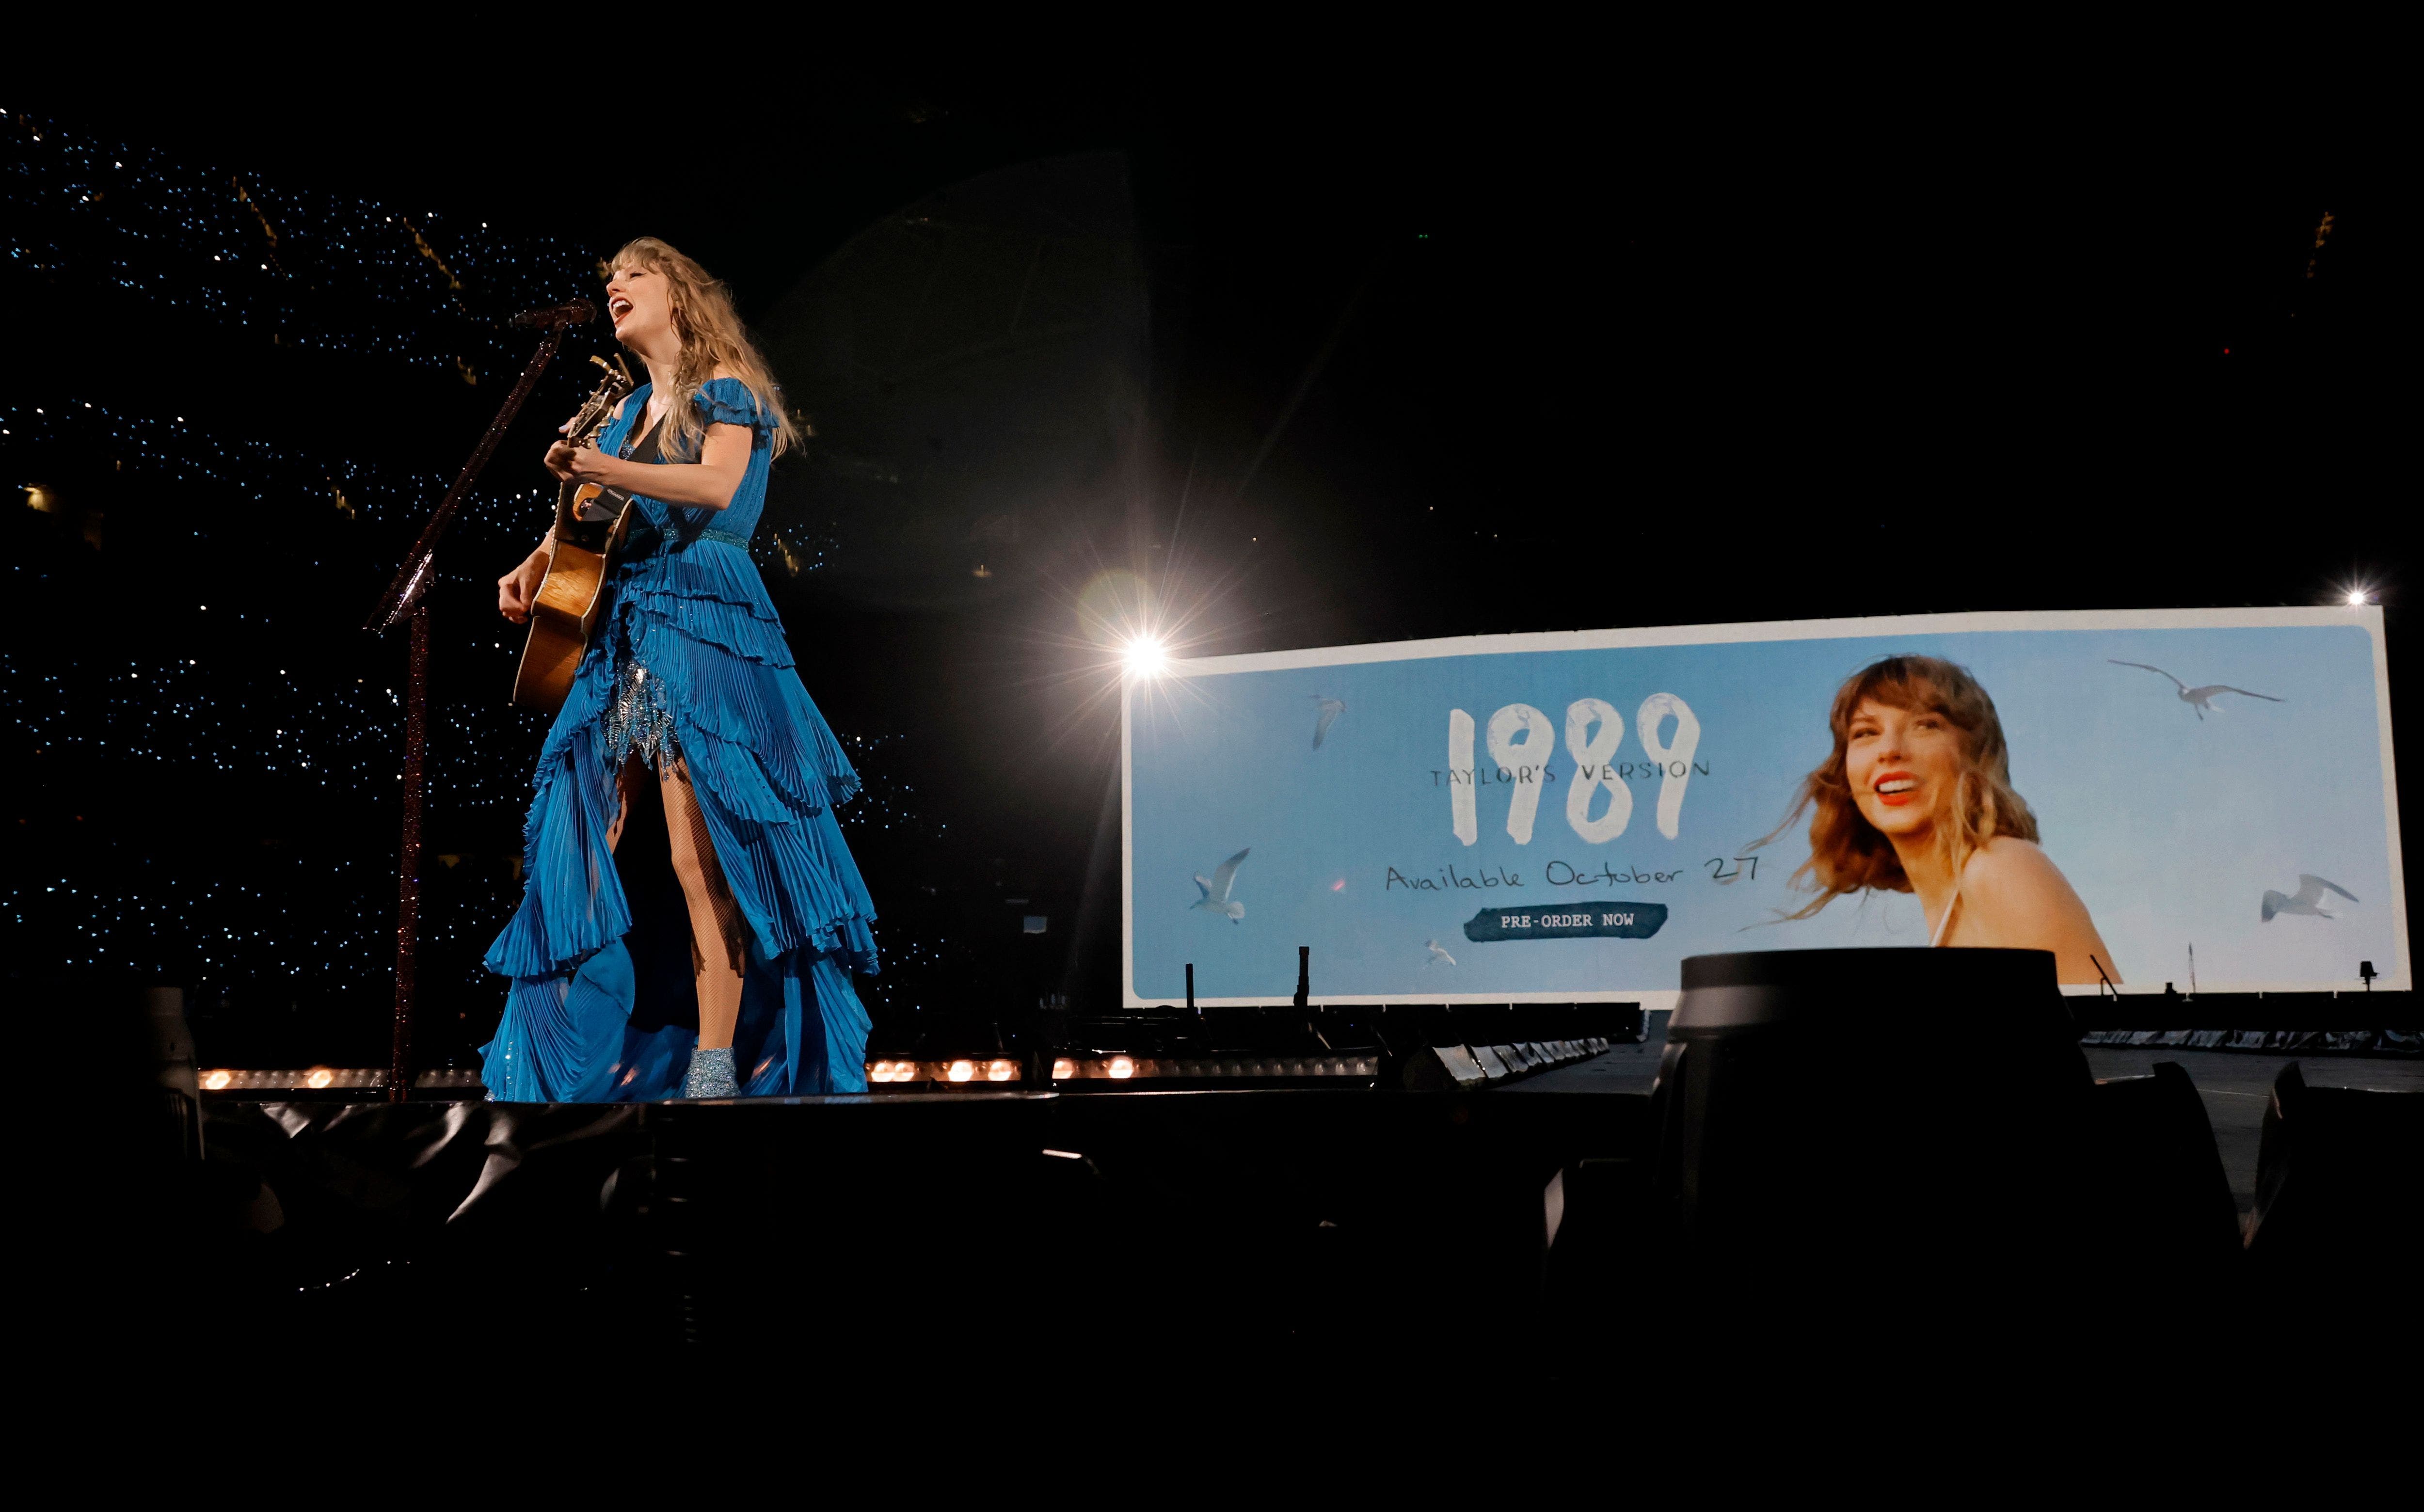 Taylor Swift '1989 (Taylor's Version)' - News, Release Date